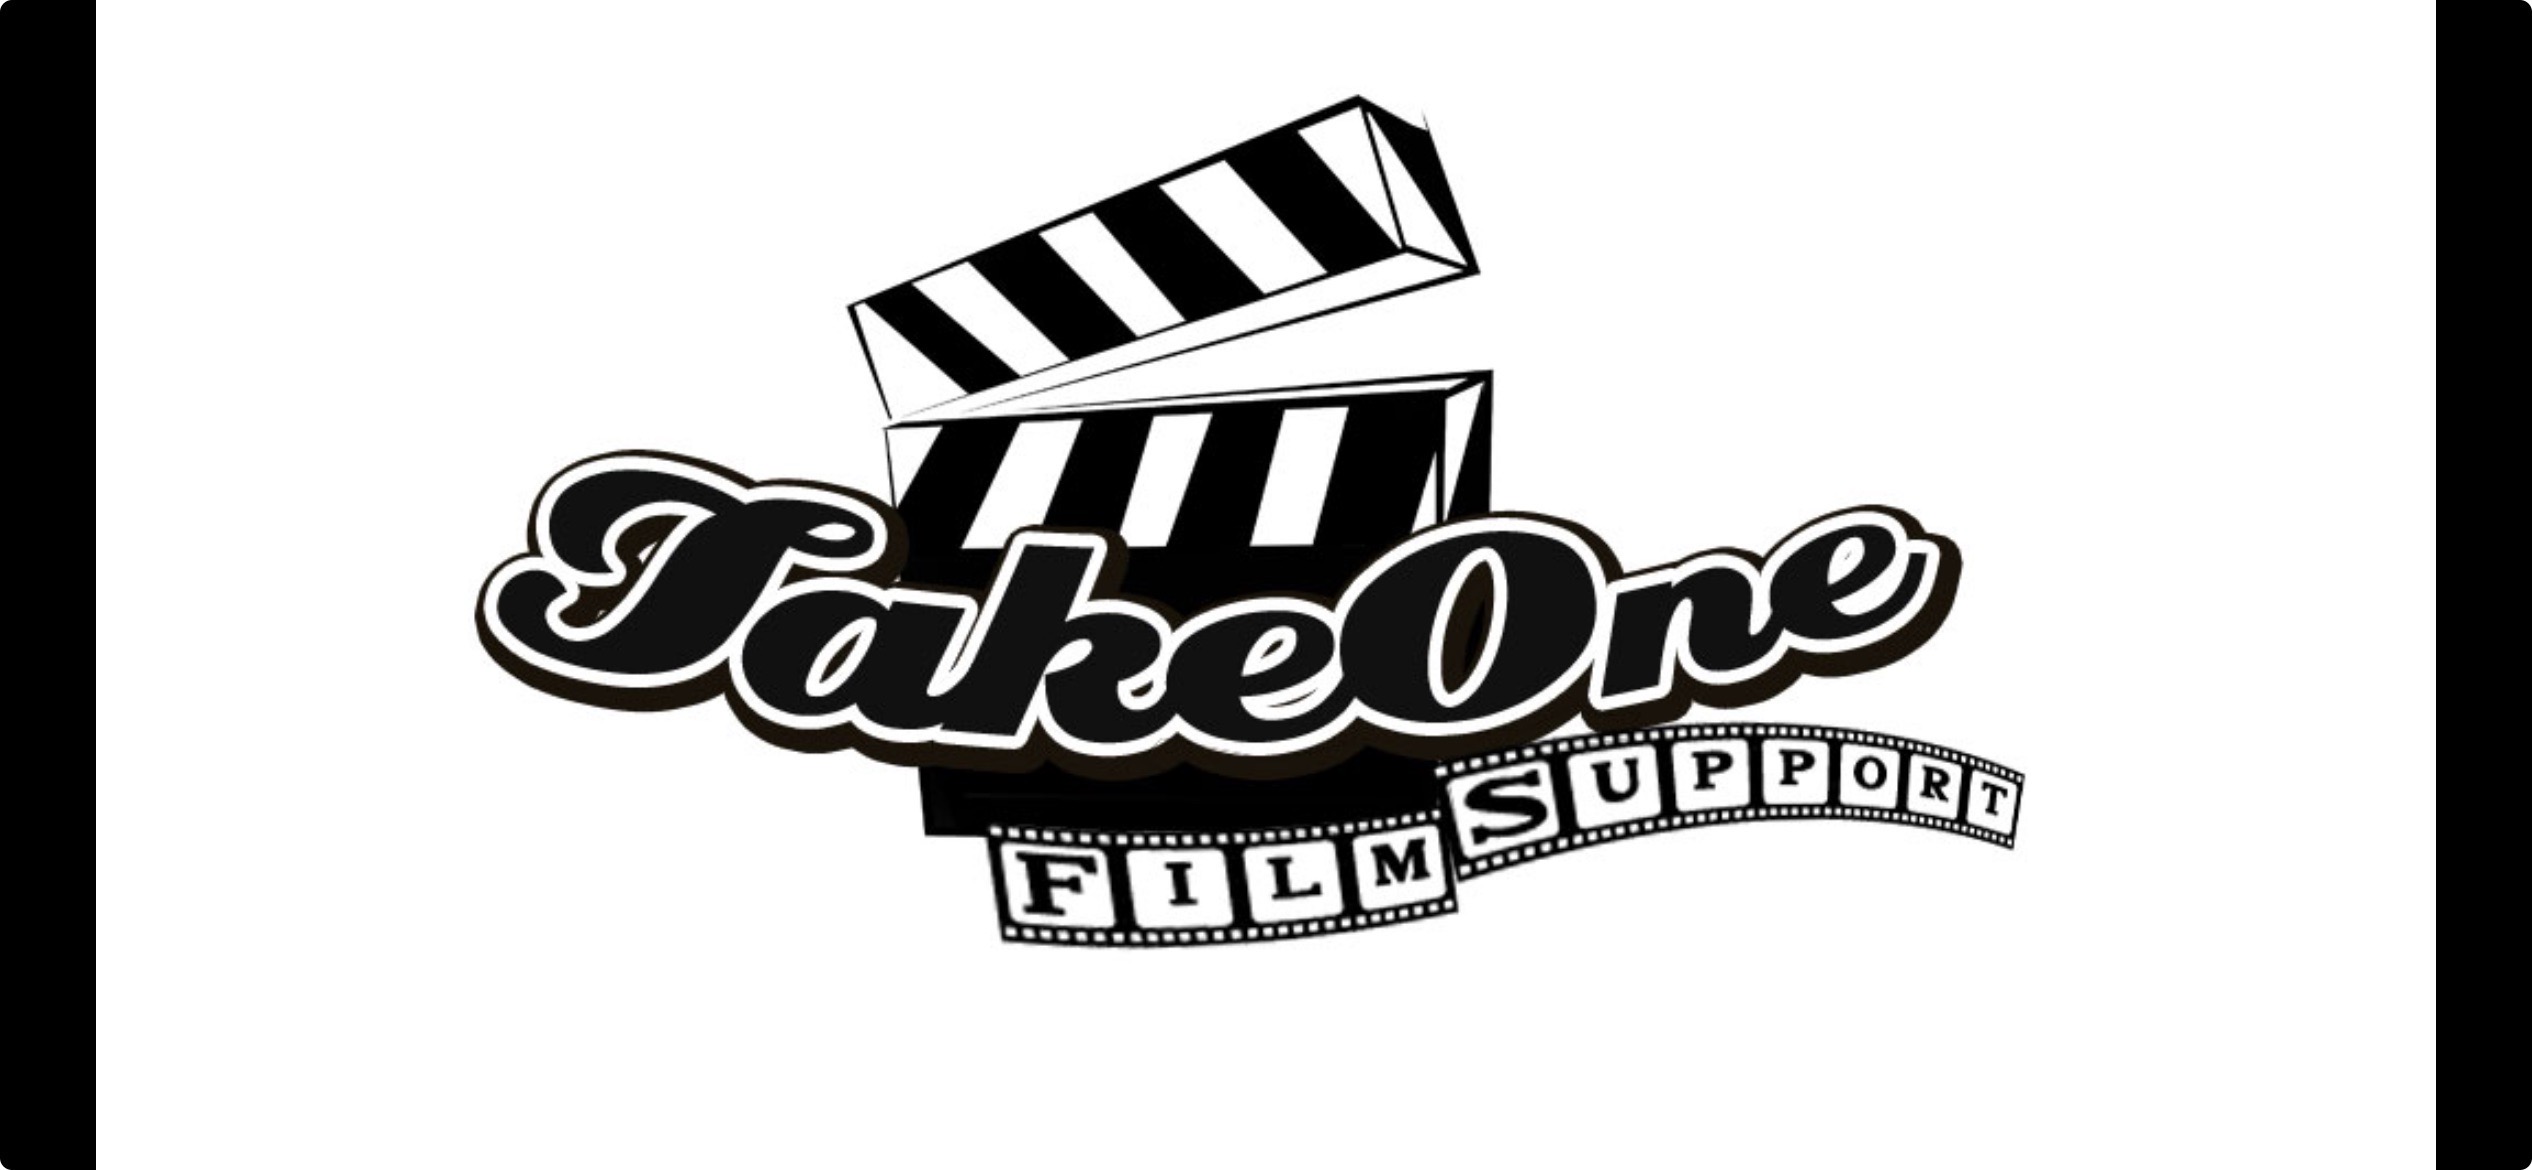 Take One Film Support